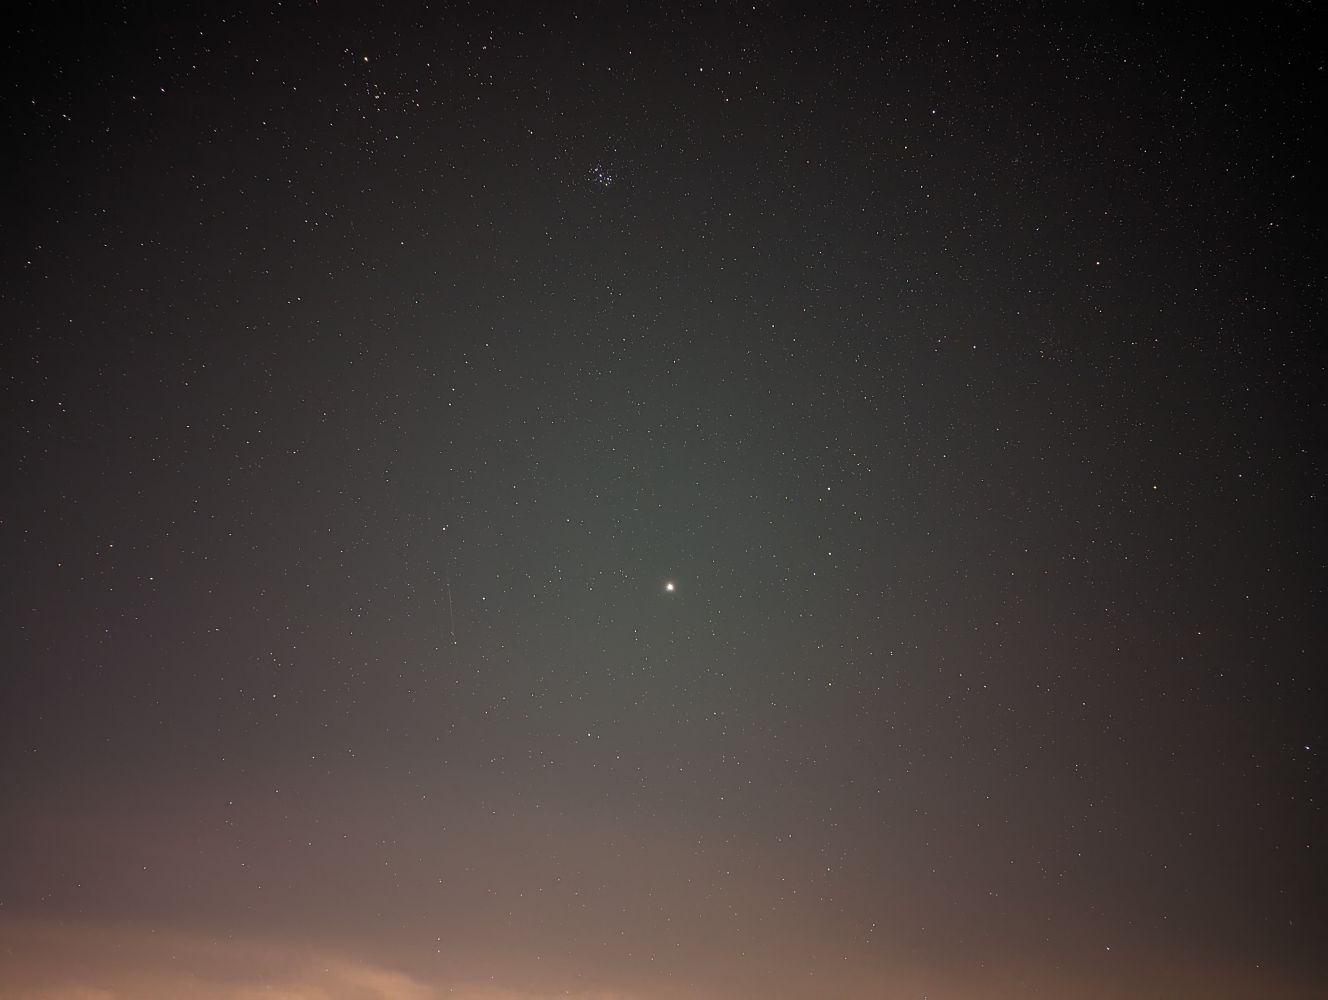 A clear night sky taken in astrophotography mode. Thousands of stars around a bright Jupiter. There is a faint streak to the left of Jupiter which is the only Geminid meteor I caught in an image.